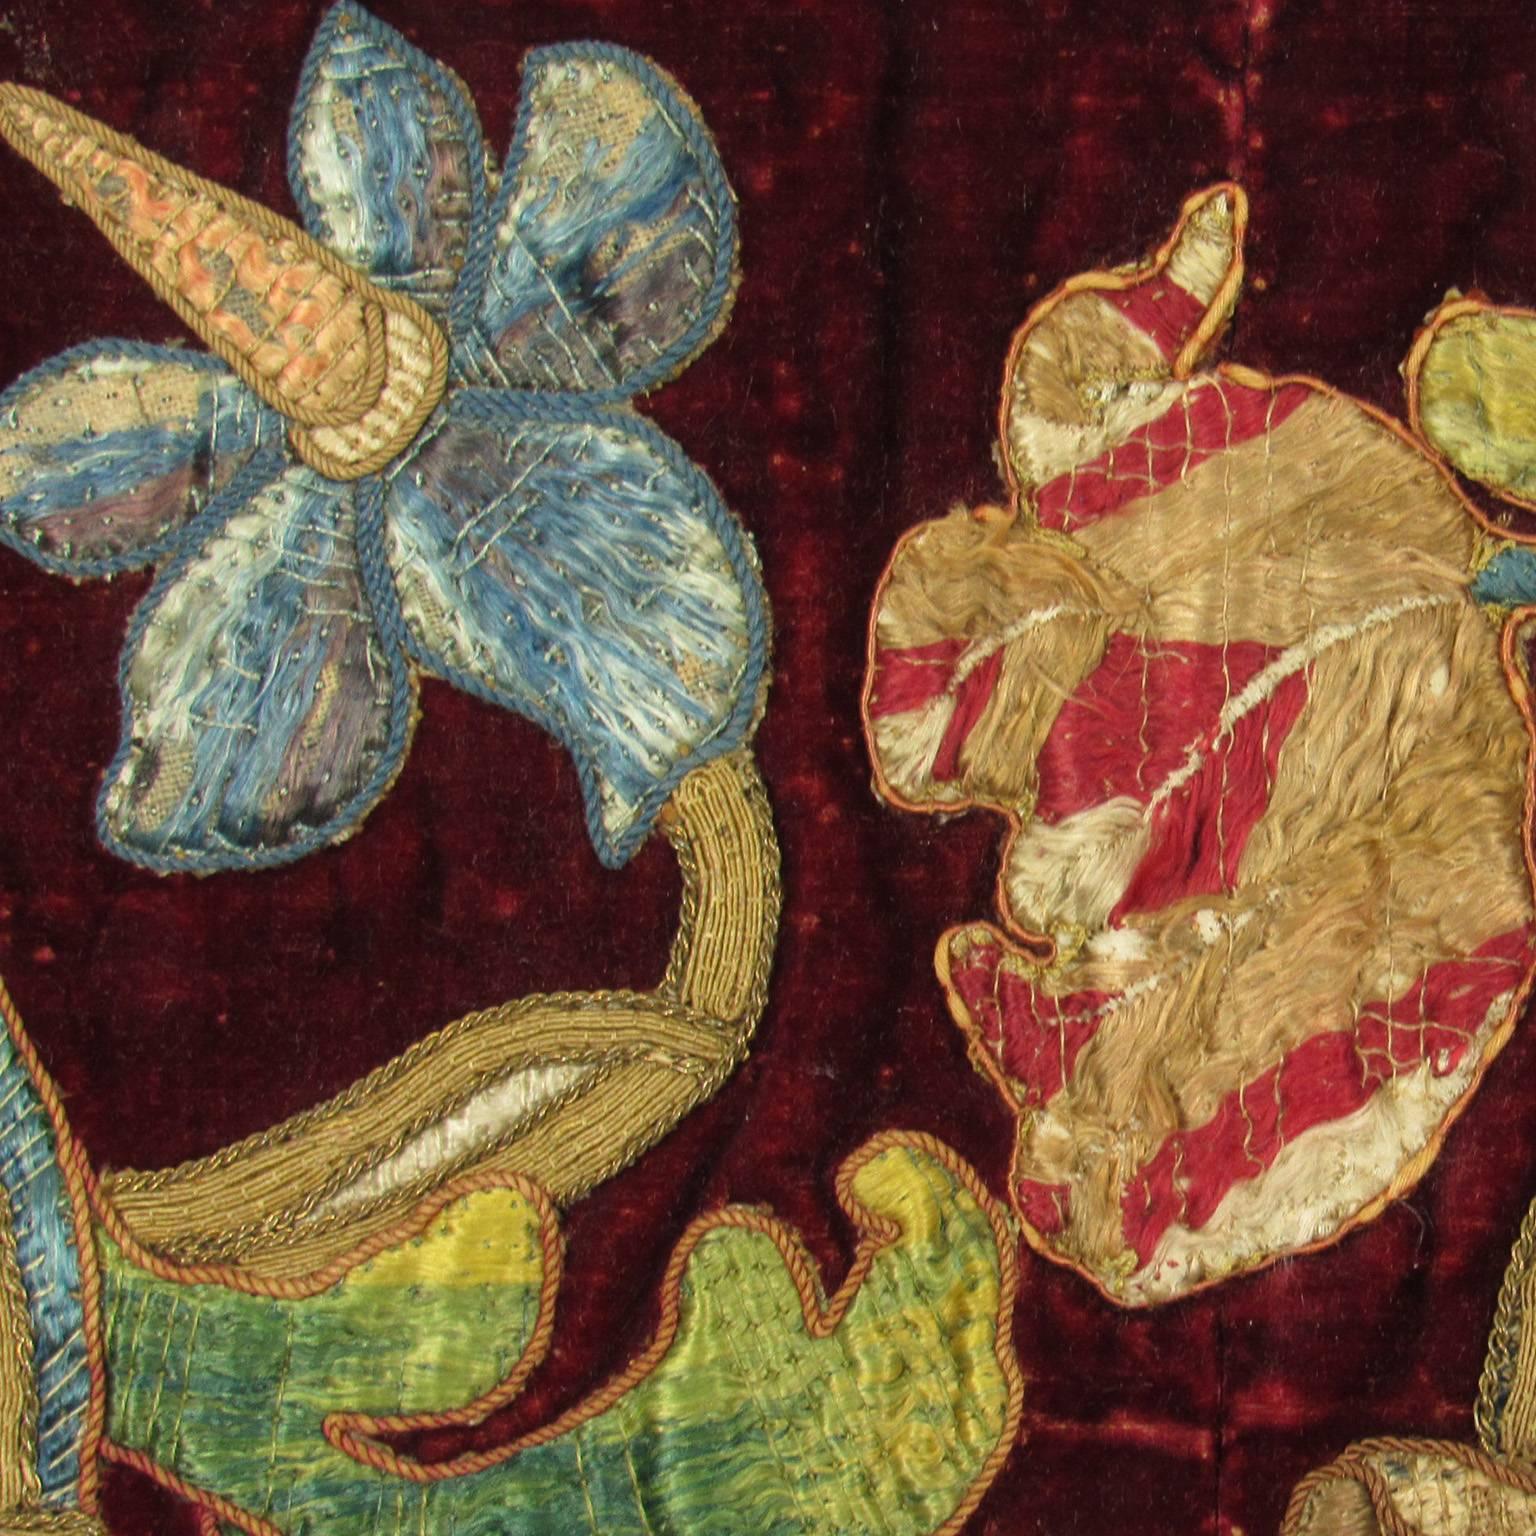 Continental Renaissance style couched silk and goldwork embroidered red velvet textile, late 18th to early 19th century. Colorful silk and gold threads form a beautiful floral and vine pattern against a deep red background with metallic thread